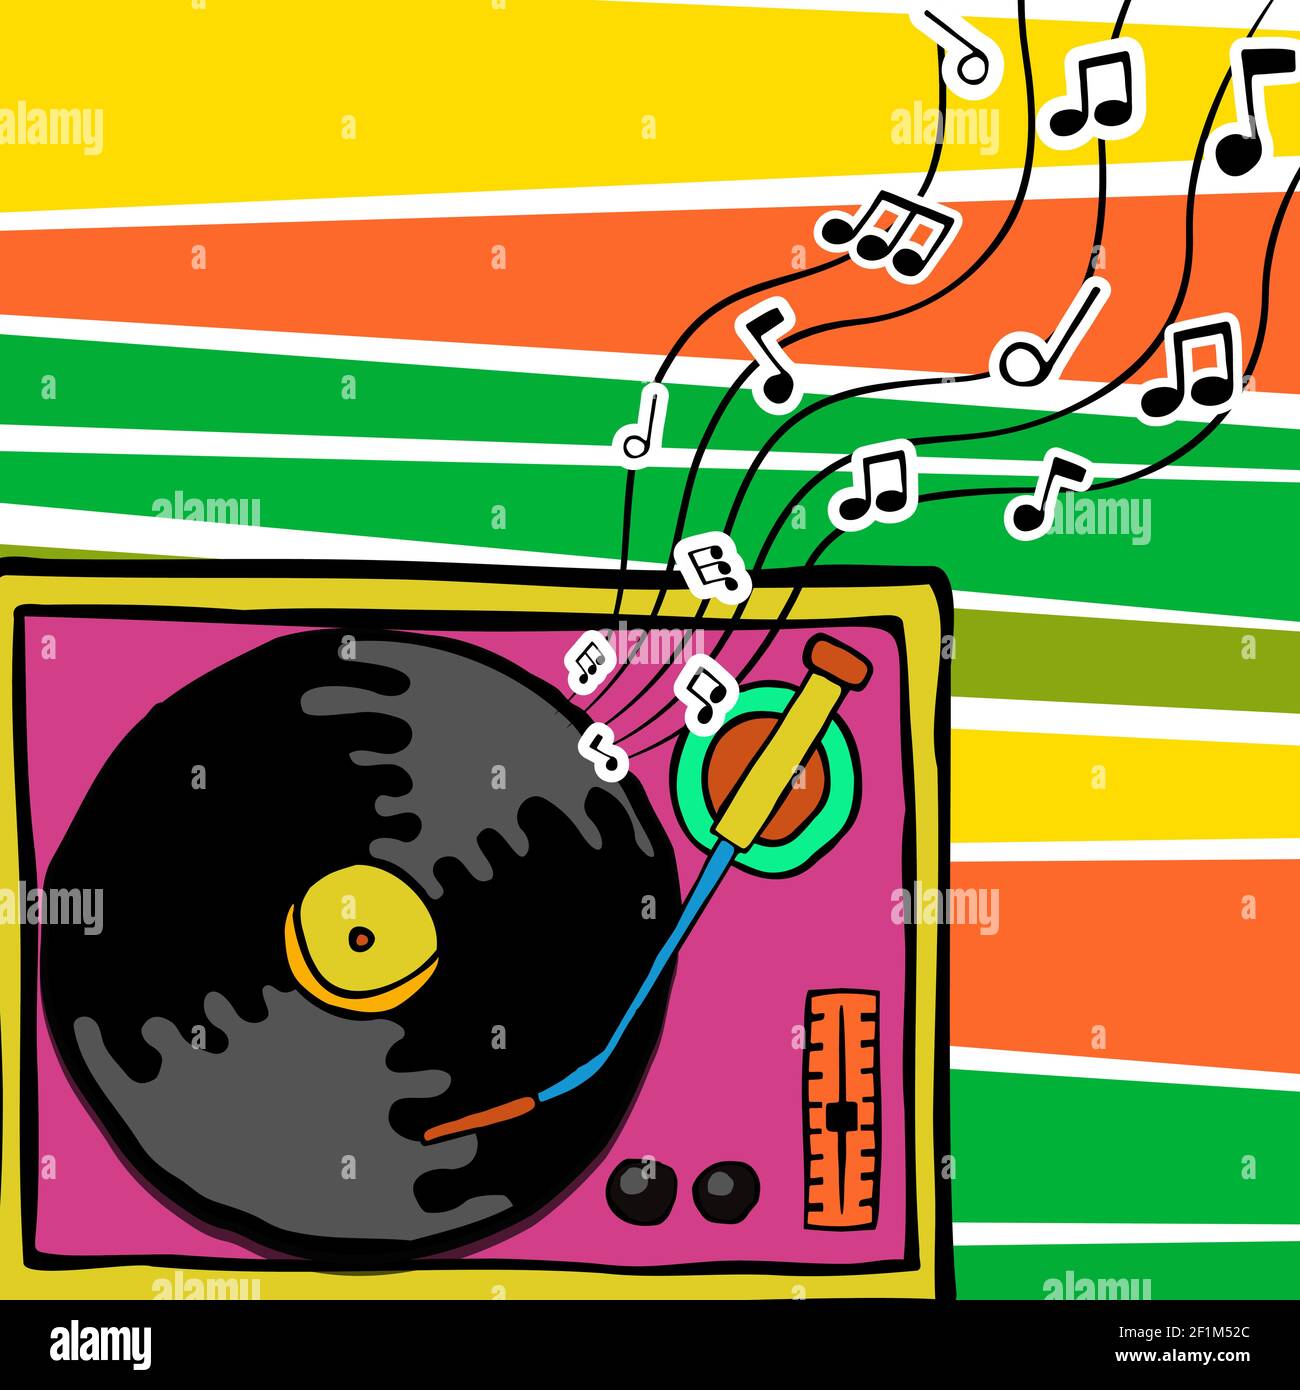 Colorful retro turntable vinyl illustration in 80s comic hand drawn style. Vintage music player with musical notes background. Stock Vector